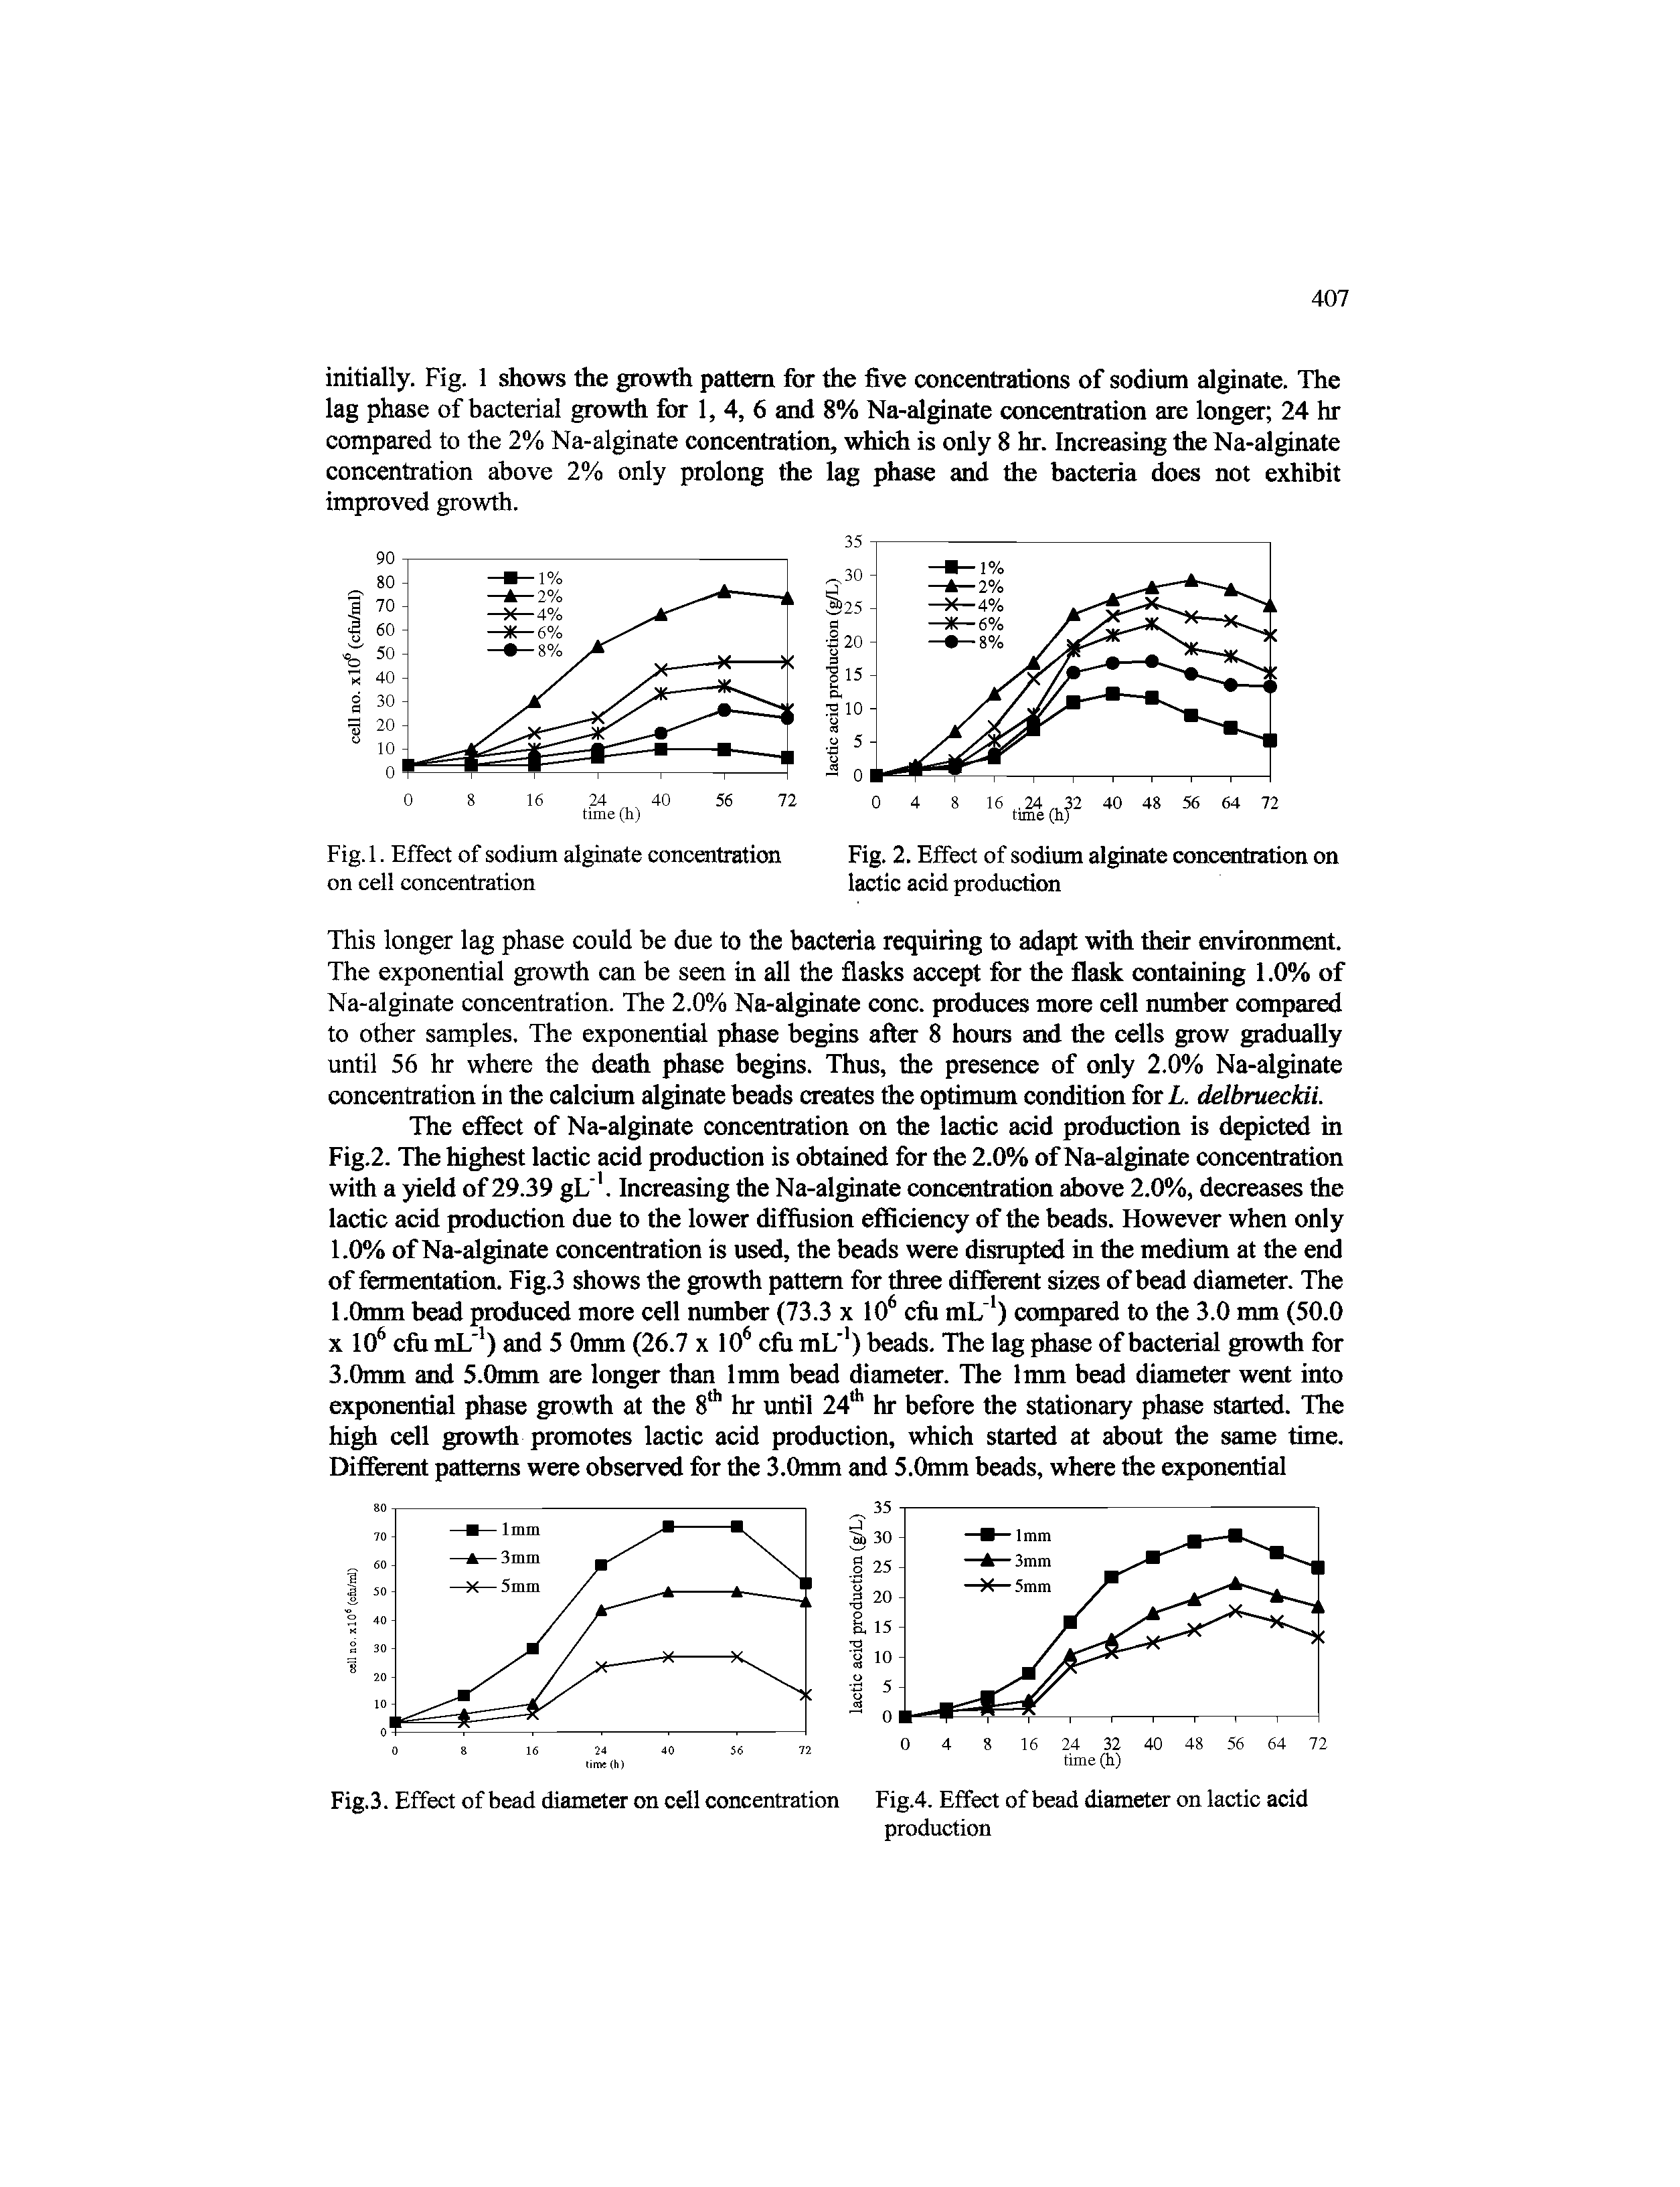 Fig. 2. Effect of sodium alginate concentration on lactic acid production...